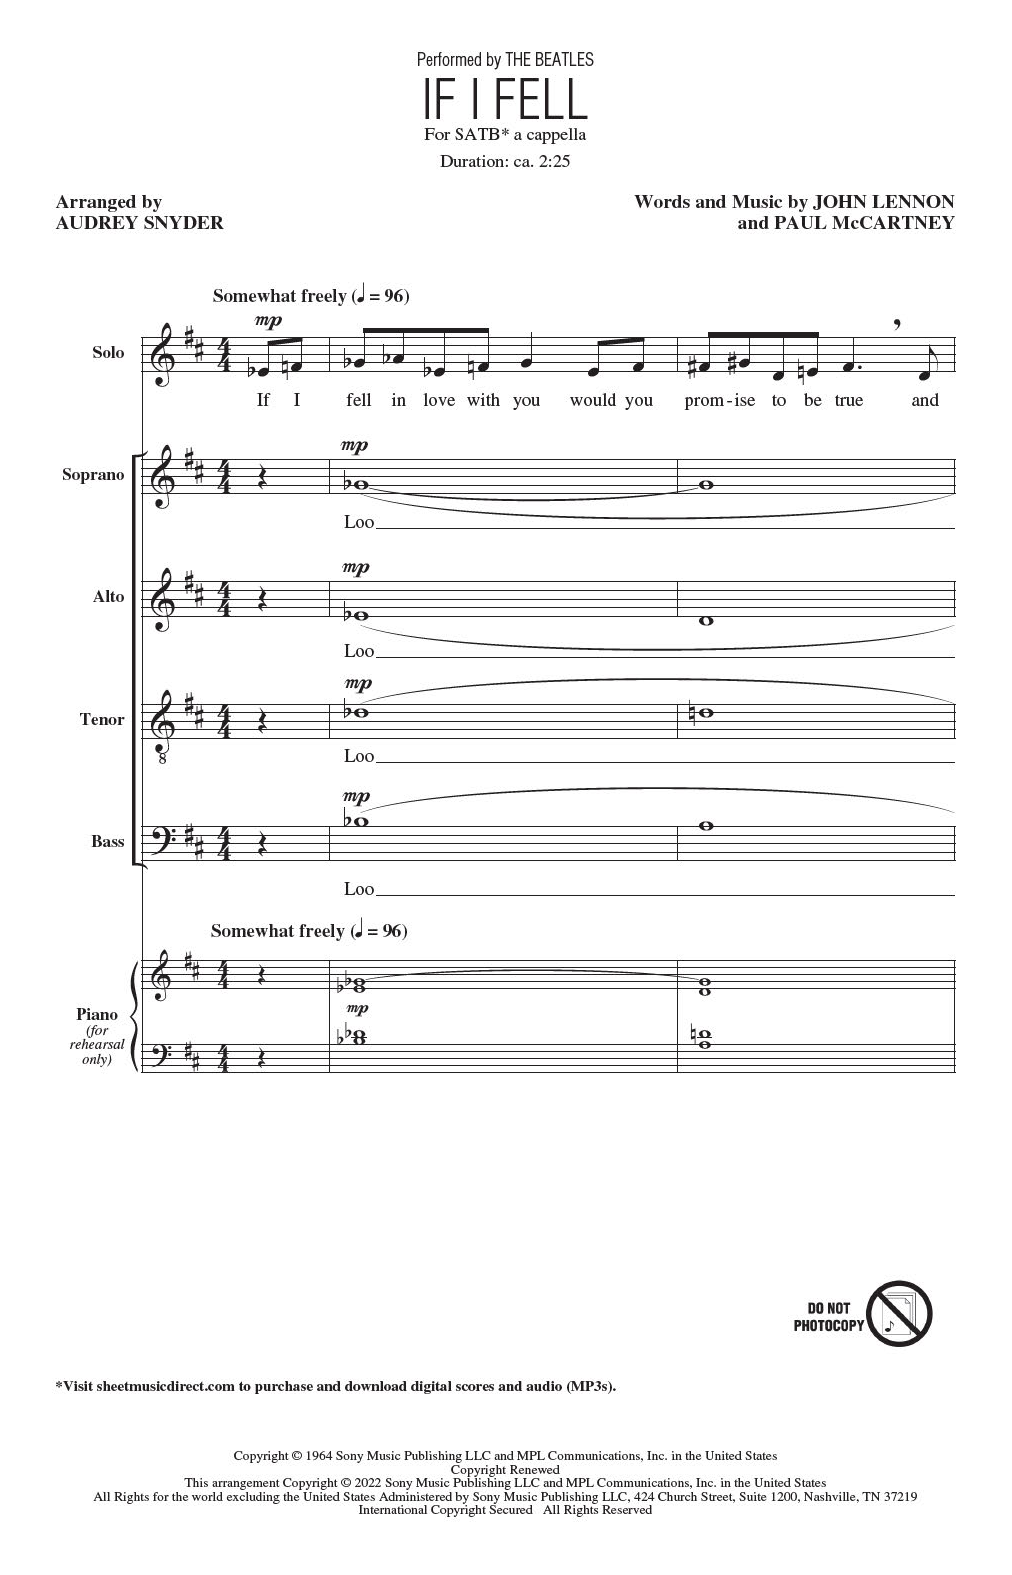 Download The Beatles If I Fell (arr. Audrey Snyder) Sheet Music